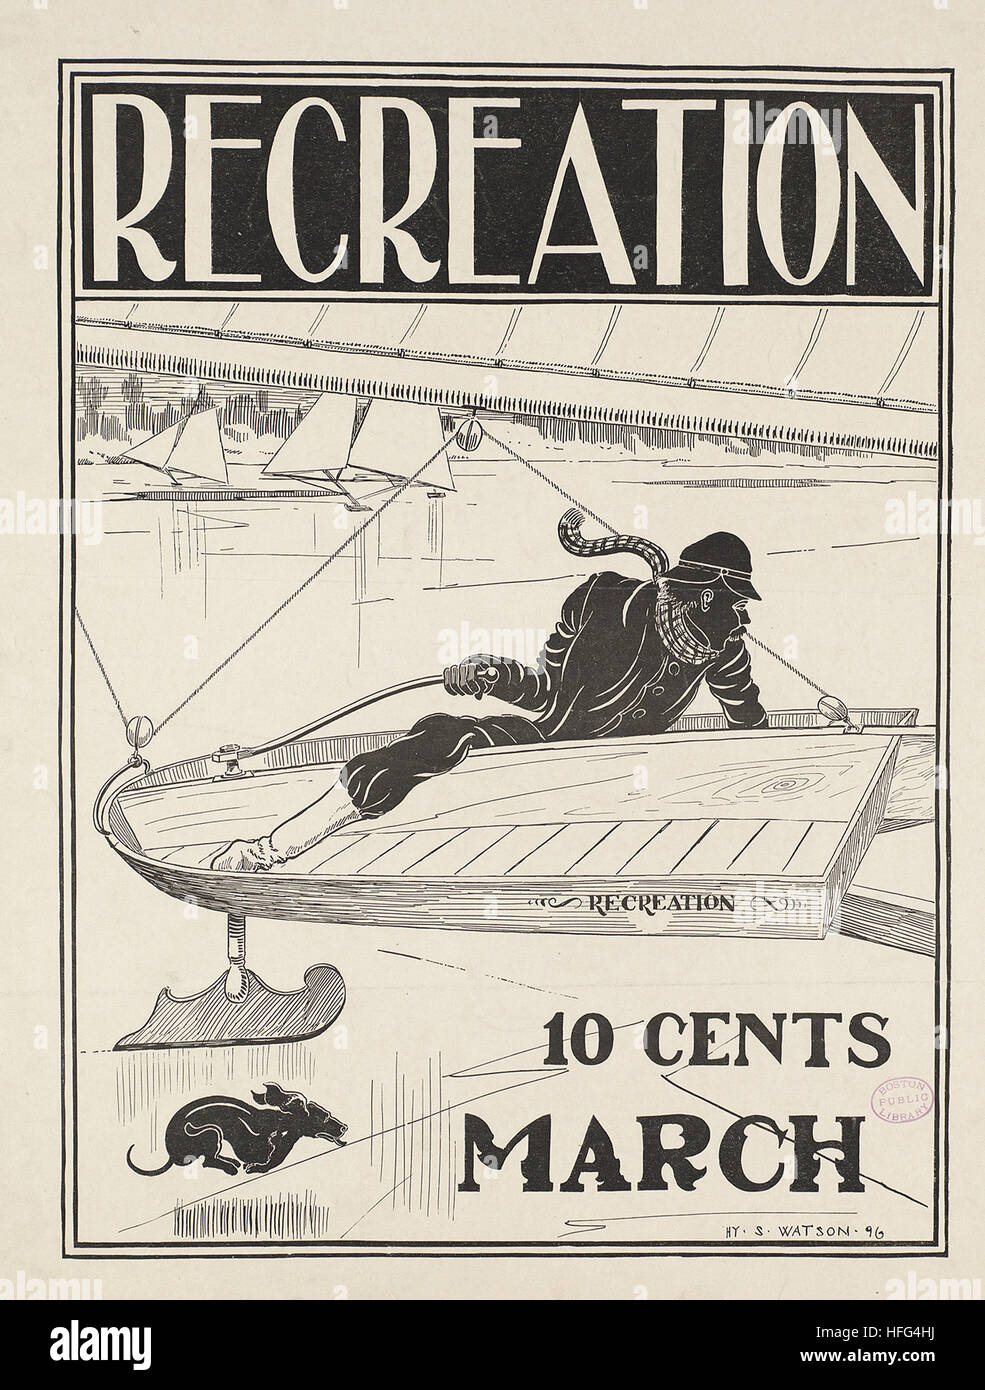 Recreation, 10 cents, March Stock Photo